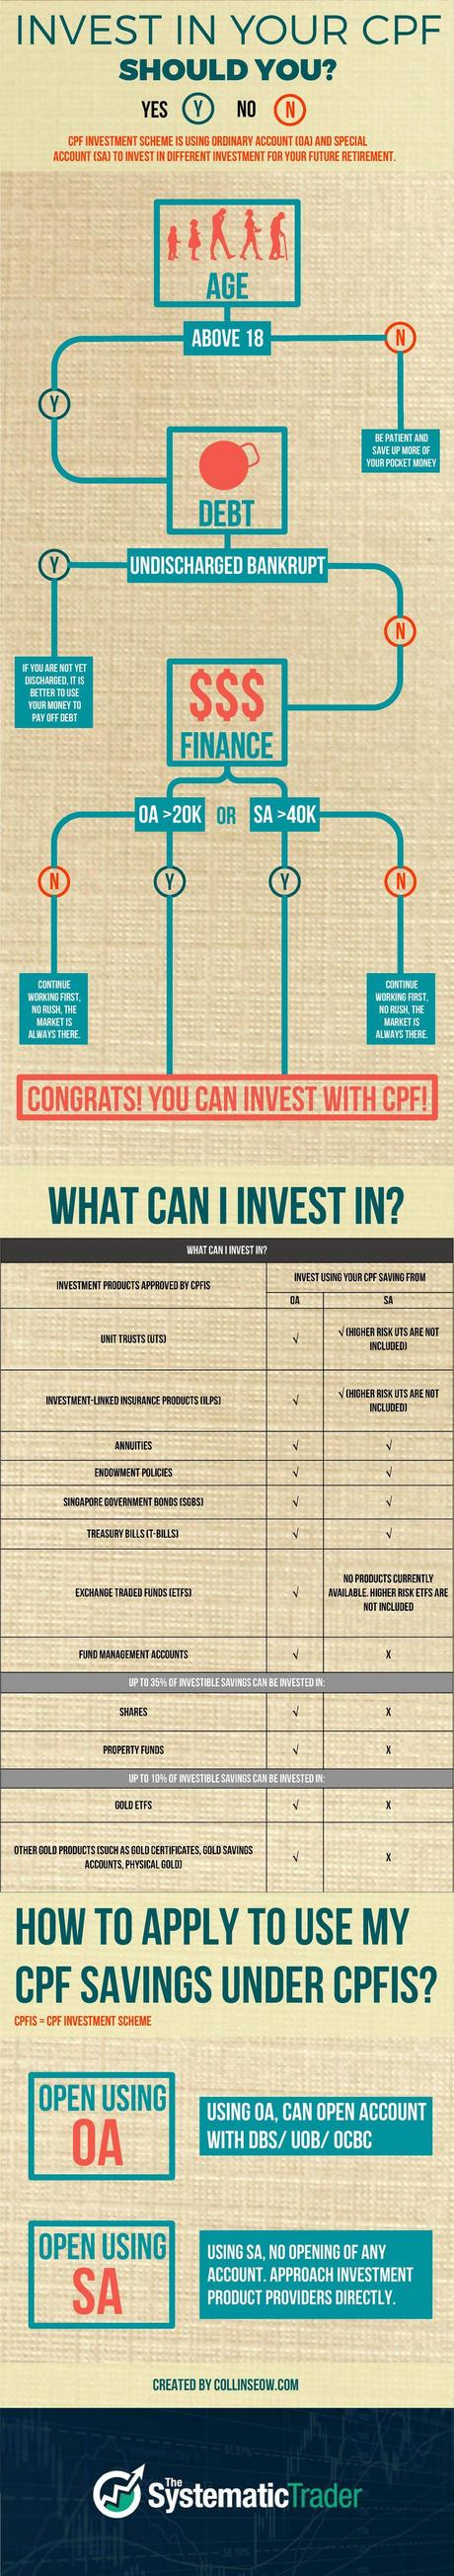 CPF Investment: Passive Income Guide for All Singaporeans infographic